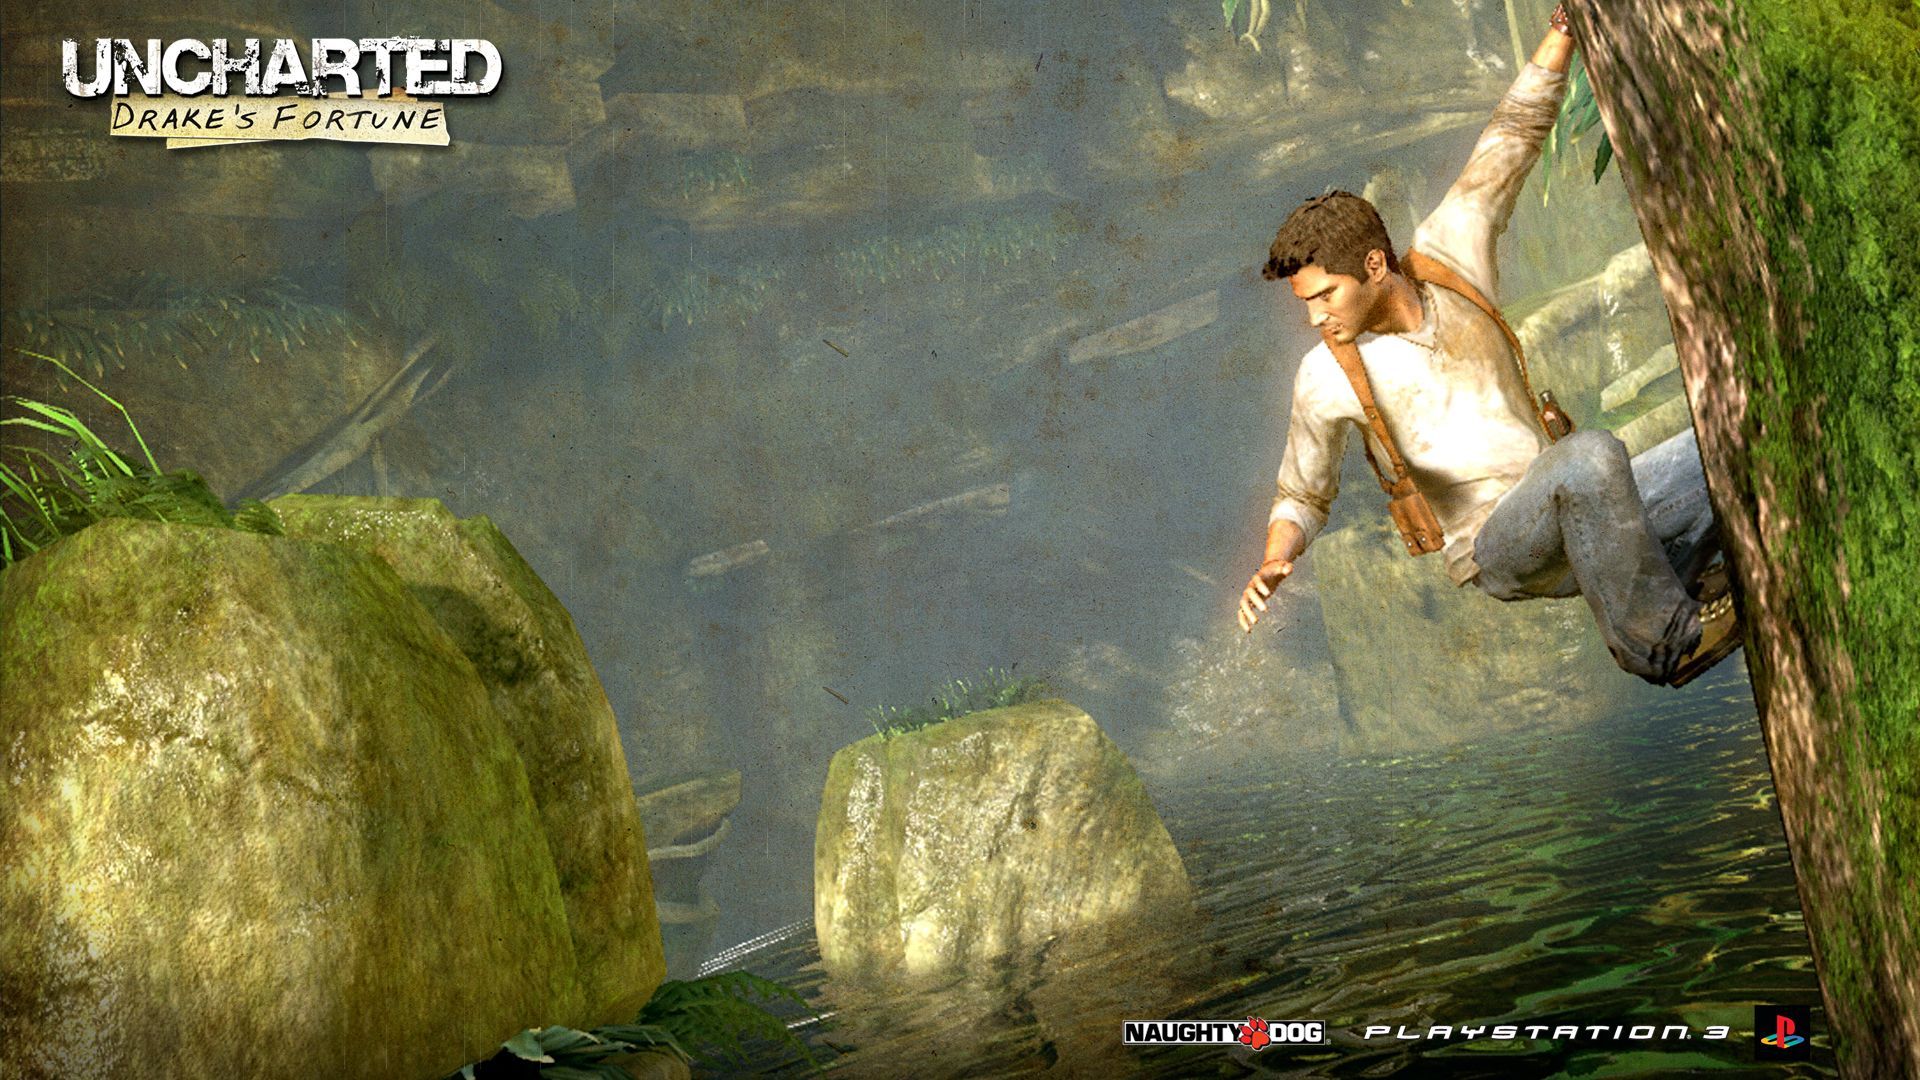 Preparing wallpaper scroll wallpaper image uncharted themes desktop royalty ps3 around should primer convent. Uncharted drake's fortune, Uncharted, Nathan drake